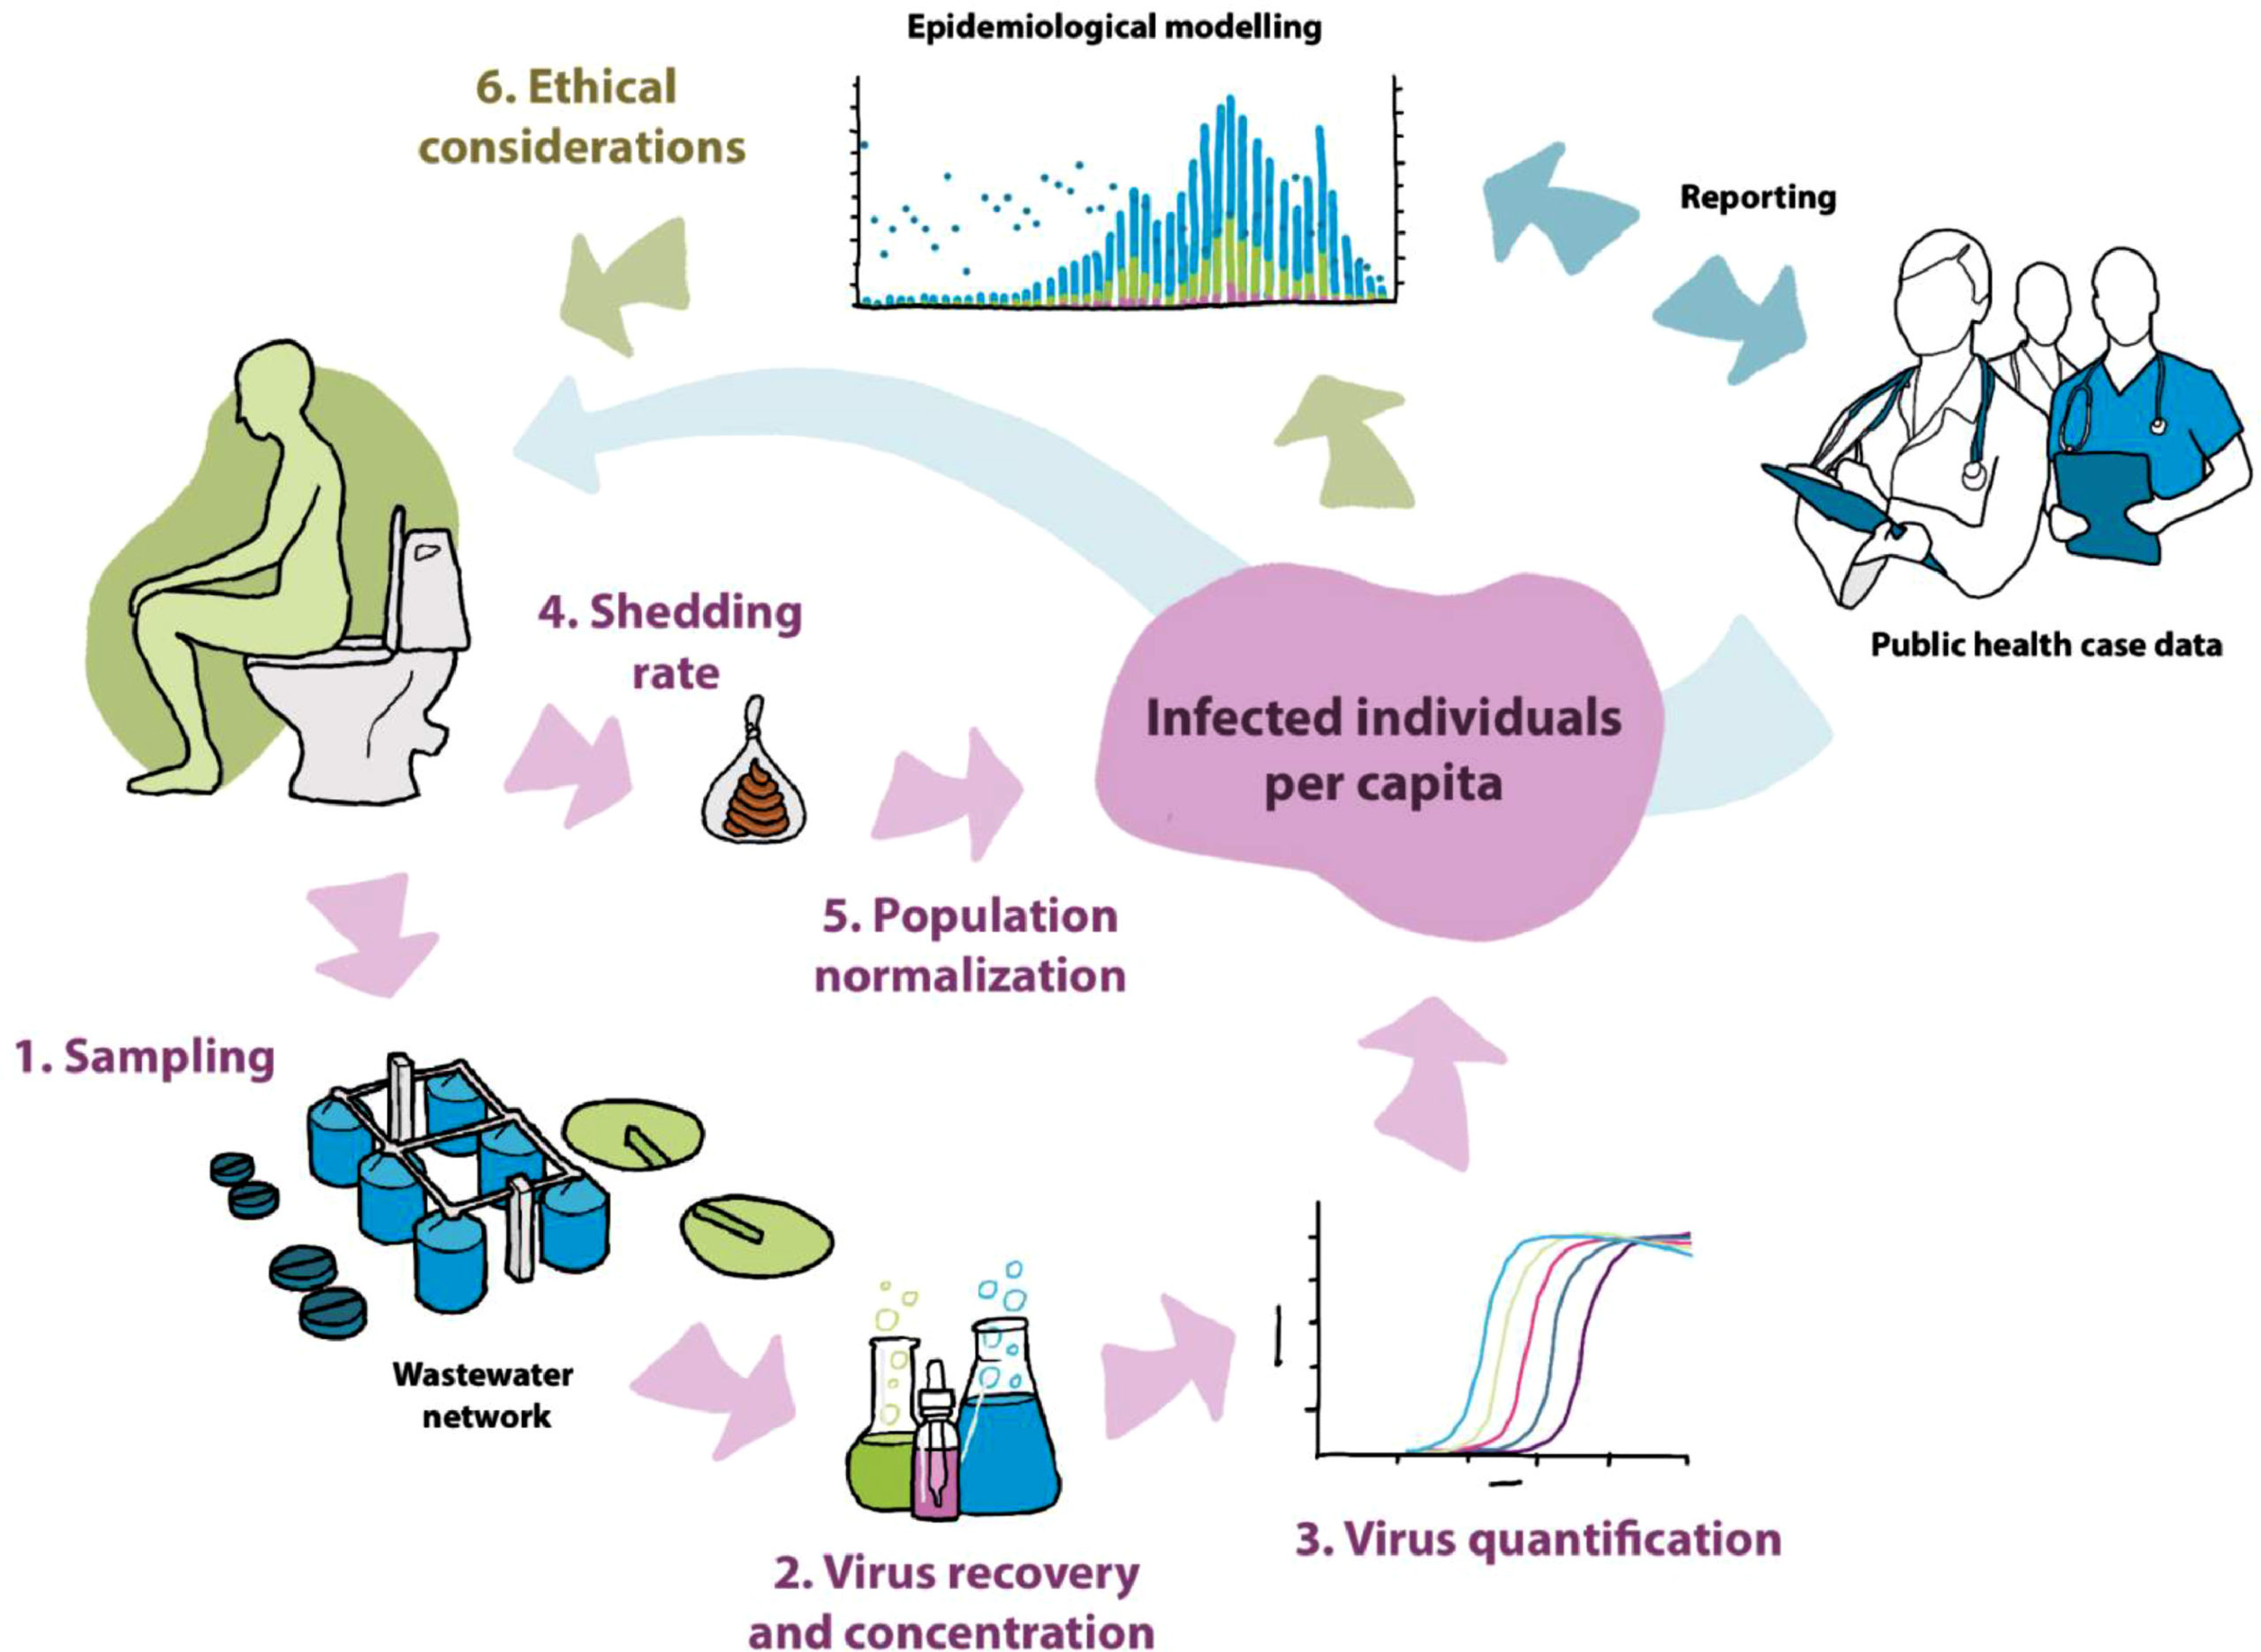 A structured approach to wastewater based epidemiology (WBE) as used community COVID-19 surveillance